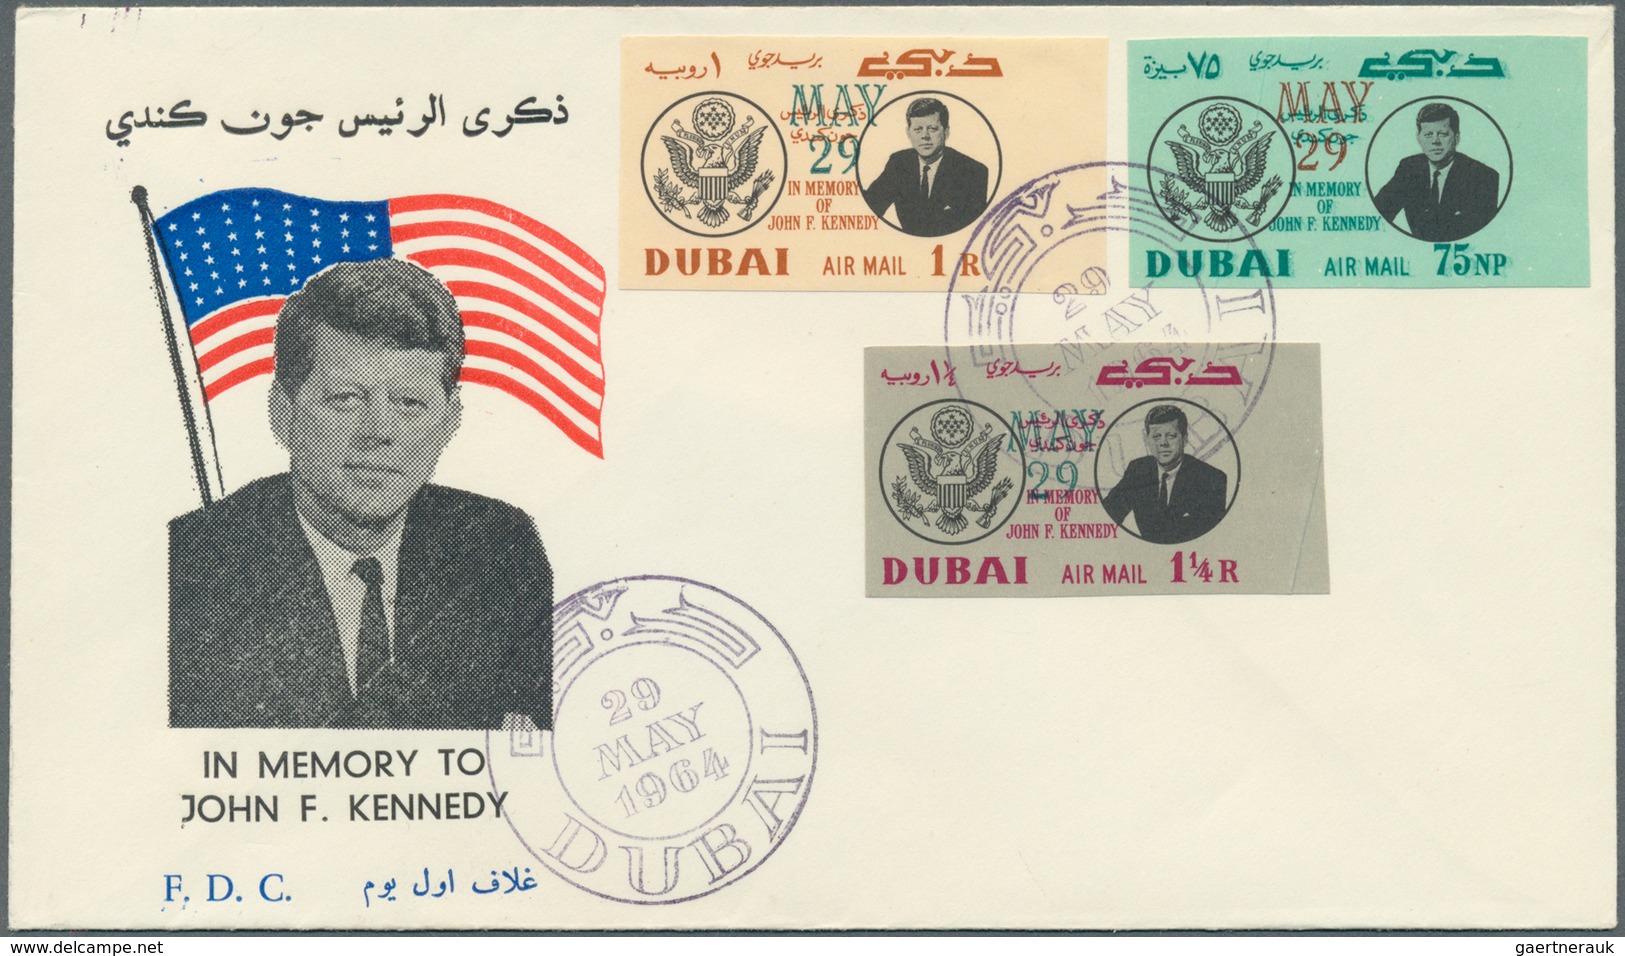 22512 Dubai: 1963/1966 (ca.), Accumulation With 76 FIRST DAY COVERS Incl. Many Complete Sets, Imperforate - Dubai